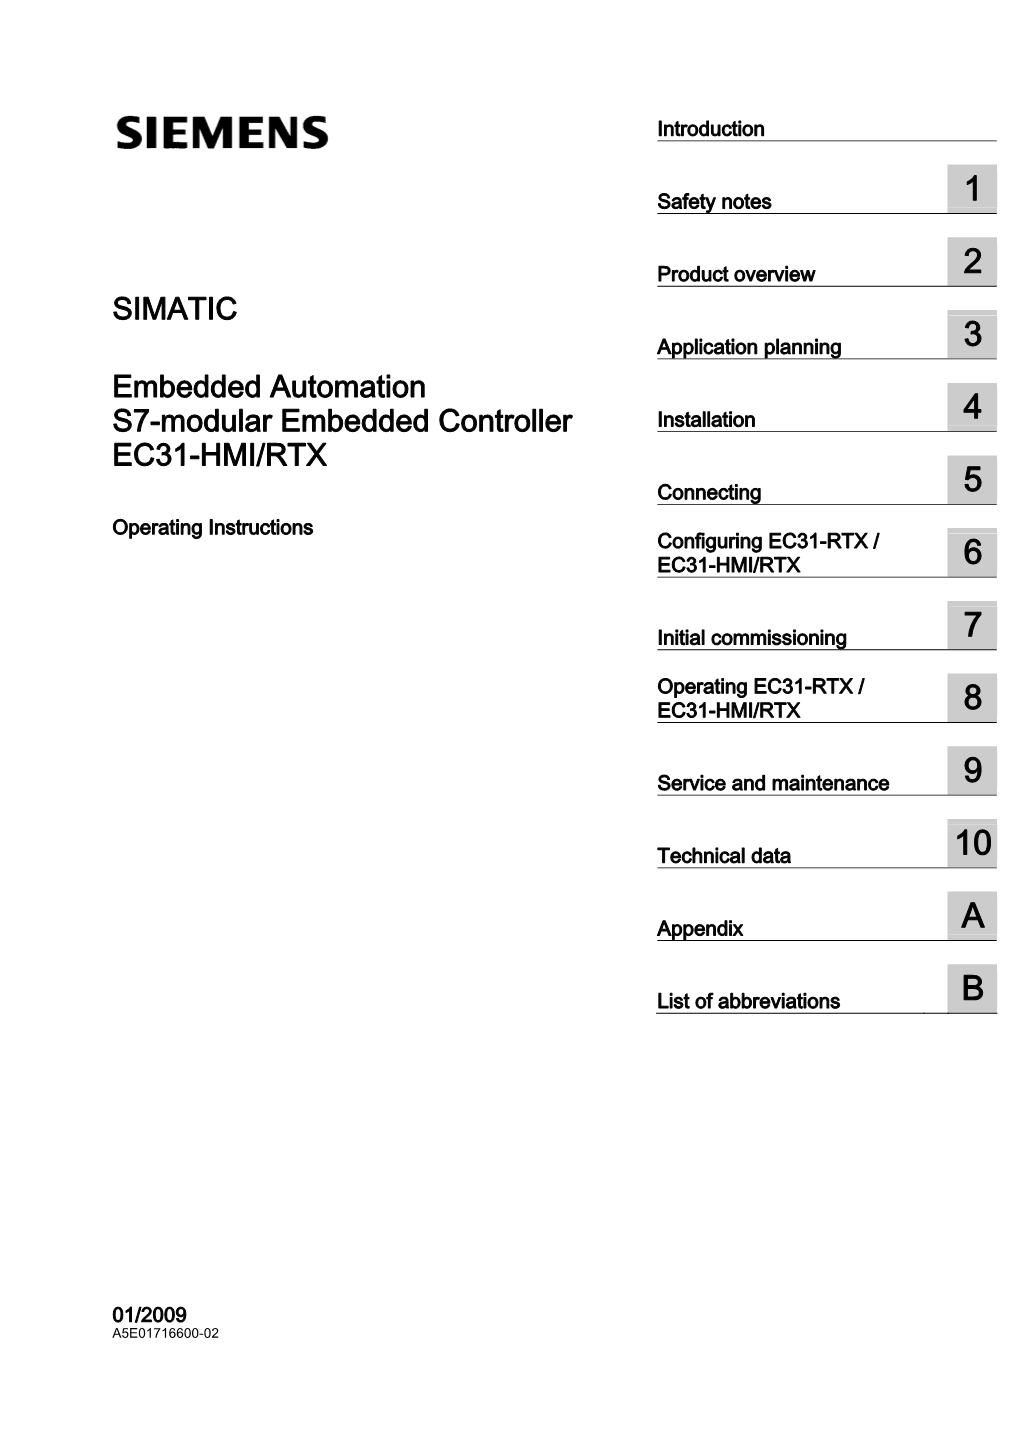 Embedded Automation S7-Modular Embedded Controller EC31-HMI/RTX Safety Notes 1 ______